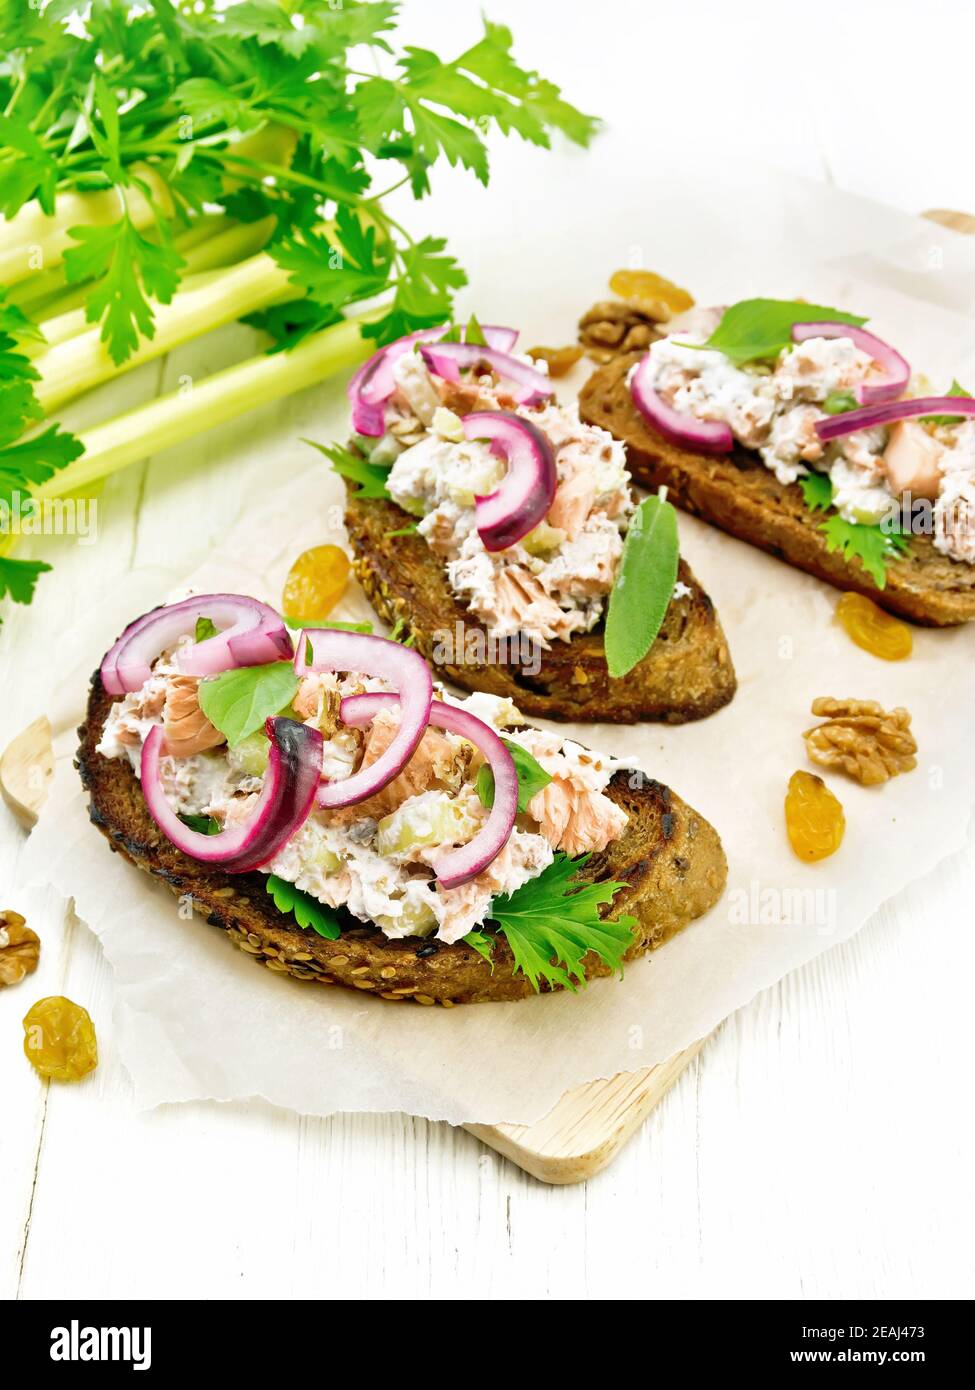 Bruschetta with fish and curd on white board Stock Photo